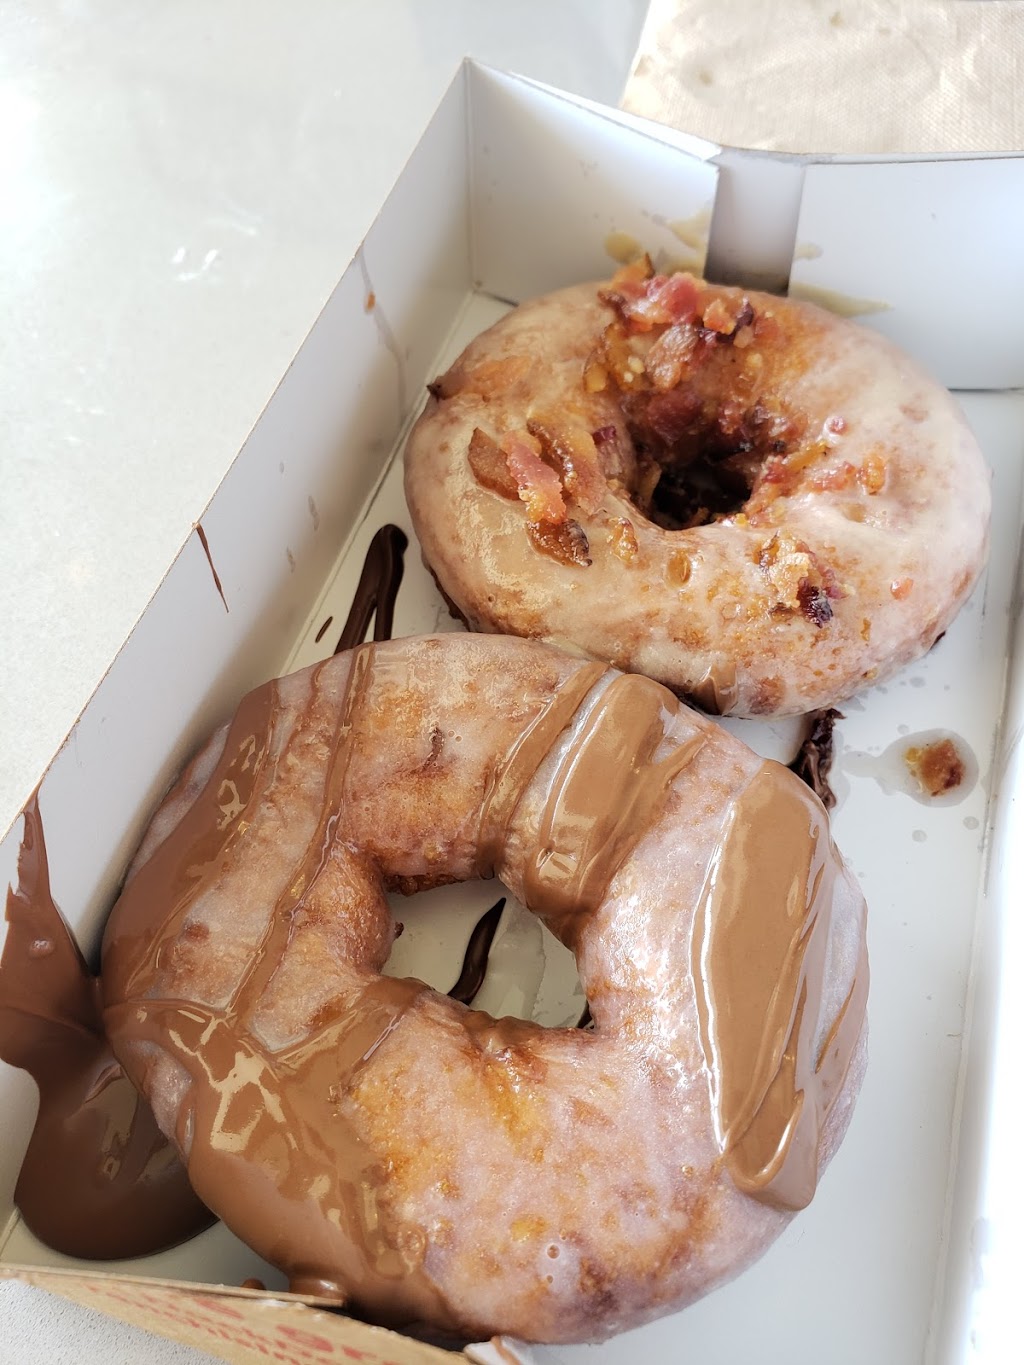 Duck Donuts Made To Order Donuts And Thrifty Ice Cream - bakery  | Photo 7 of 10 | Address: 18591 Main St, Huntington Beach, CA 92648, USA | Phone: (714) 375-5430